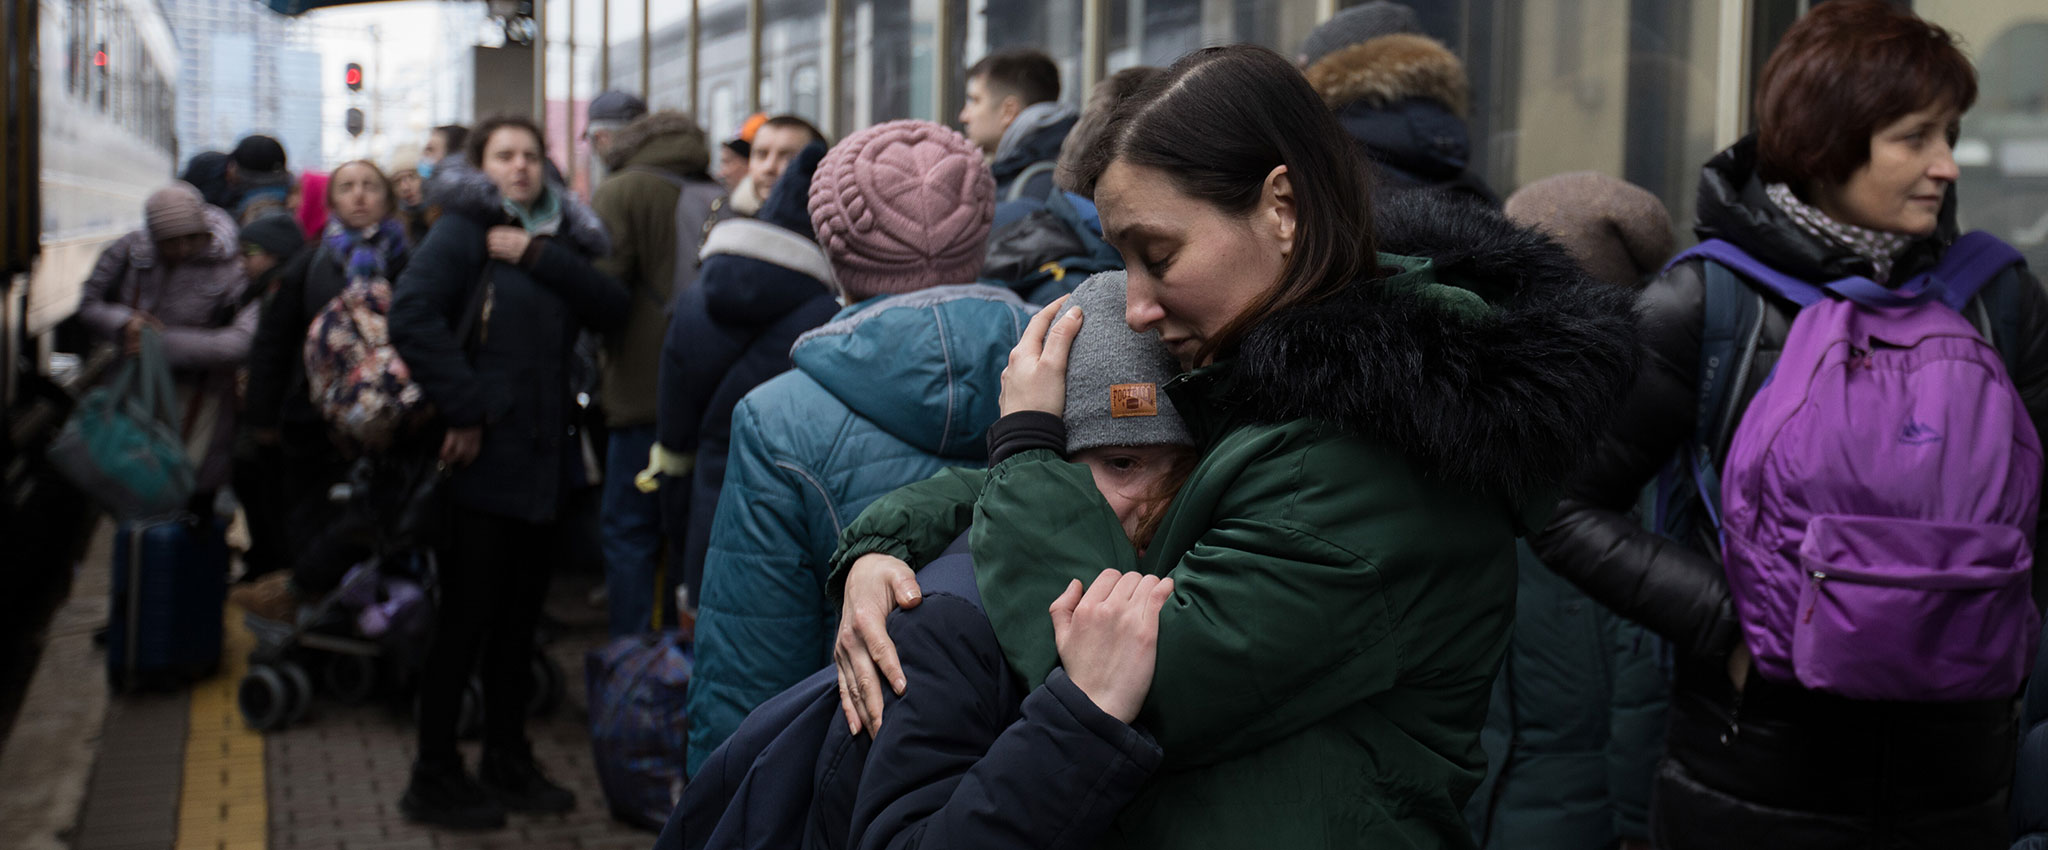 People in Kyiv, Ukraine crowd the train stations trying to get out of the country during the Russian invasion, but the evacuation trains are not enough for all the people.  1 March 2022. Photo: Sebastian Backhaus/Agentur Focus/Redux.